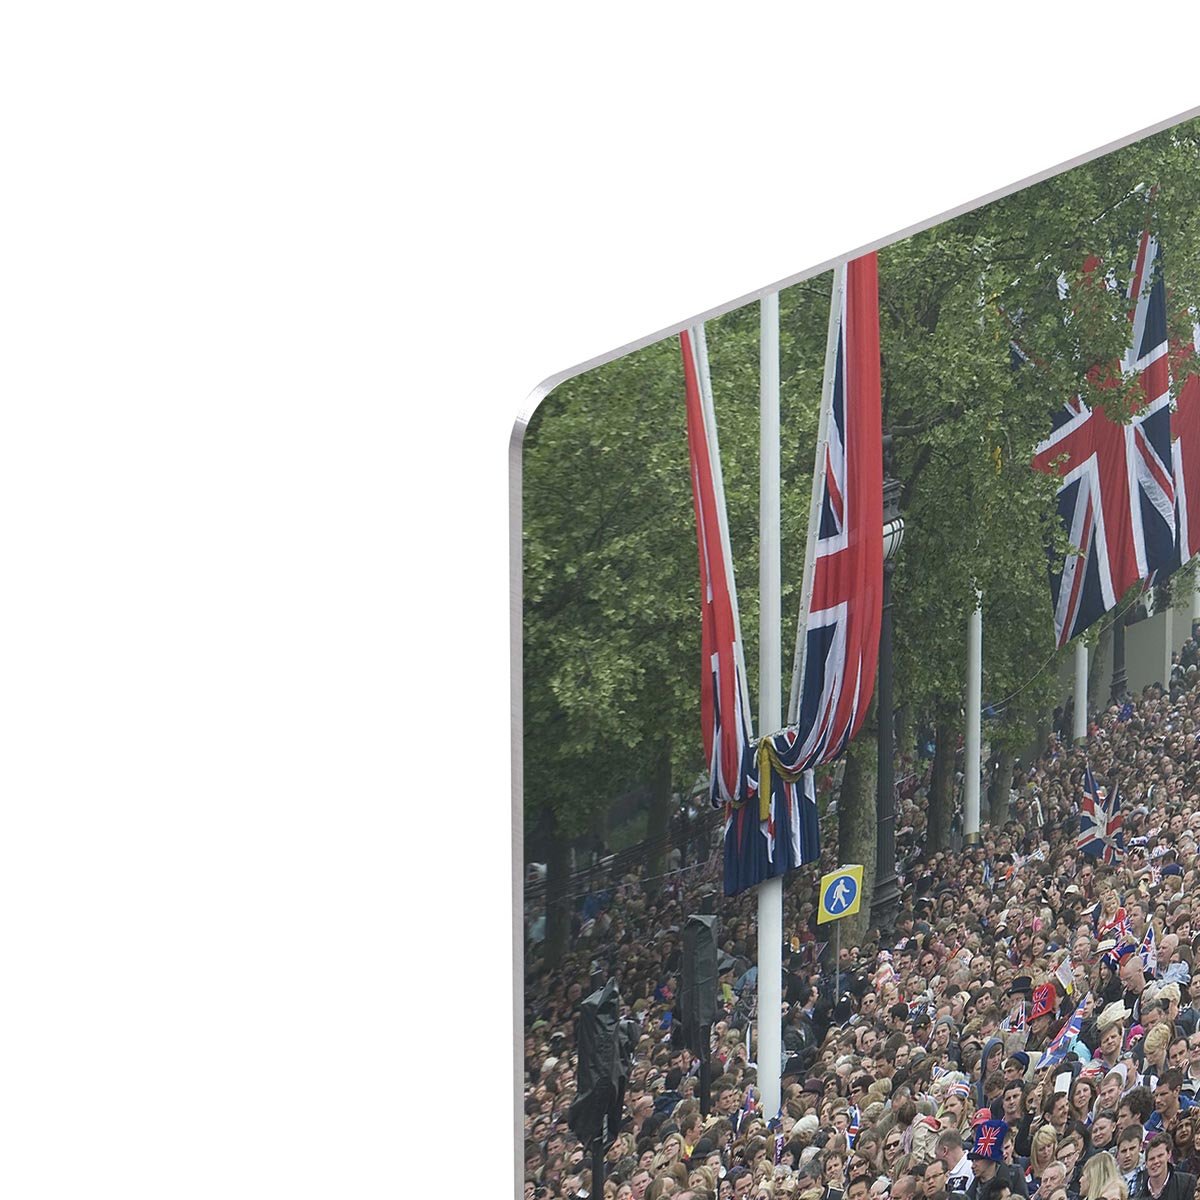 Prince William and Kate crowds for their wedding on The Mall HD Metal Print